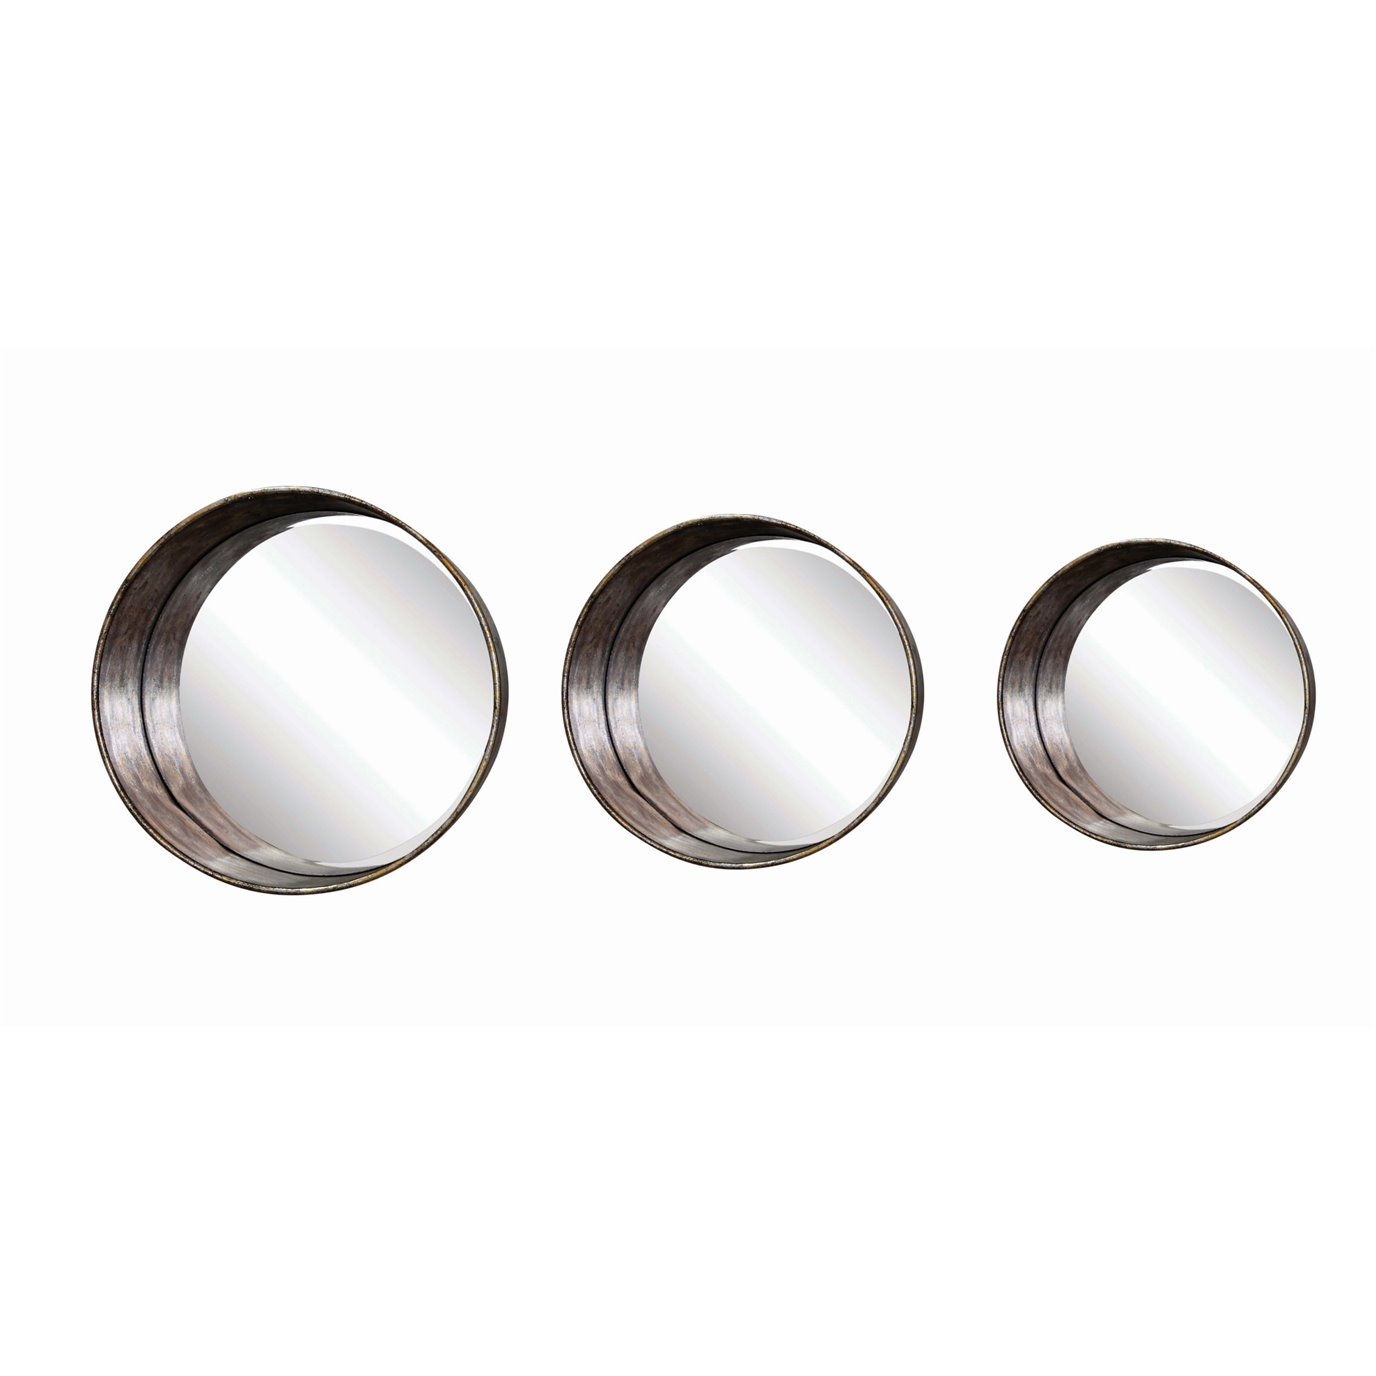 Round Metal Framed Mirrors (Set of 3 Sizes)